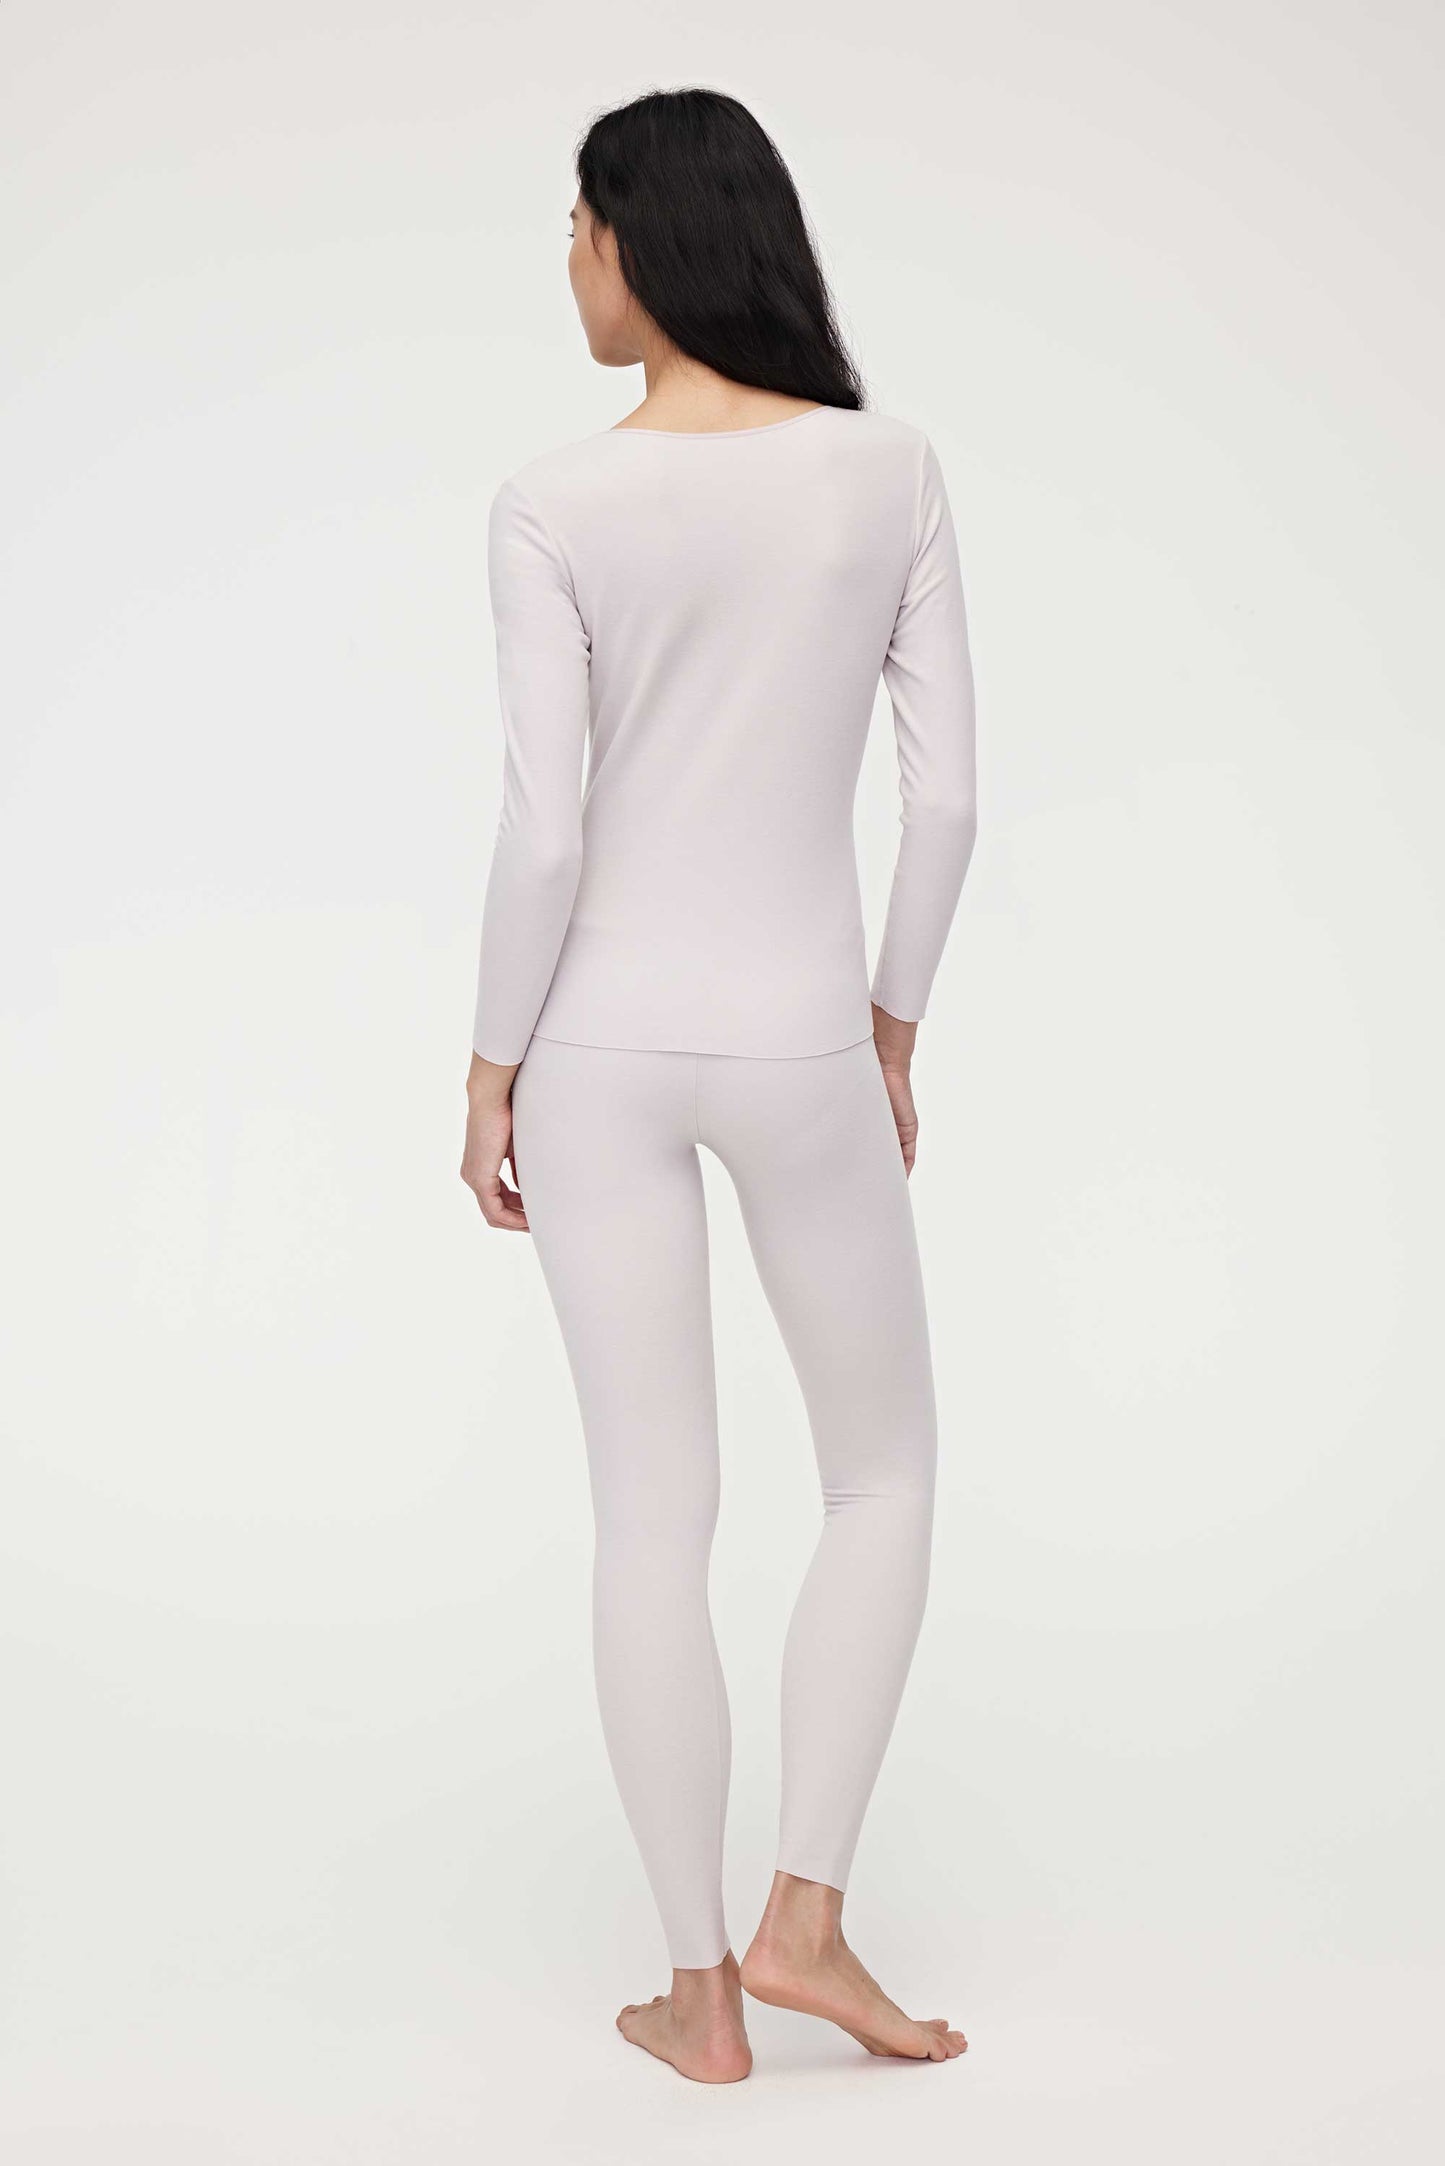 back of woman in light pink thermal wear set